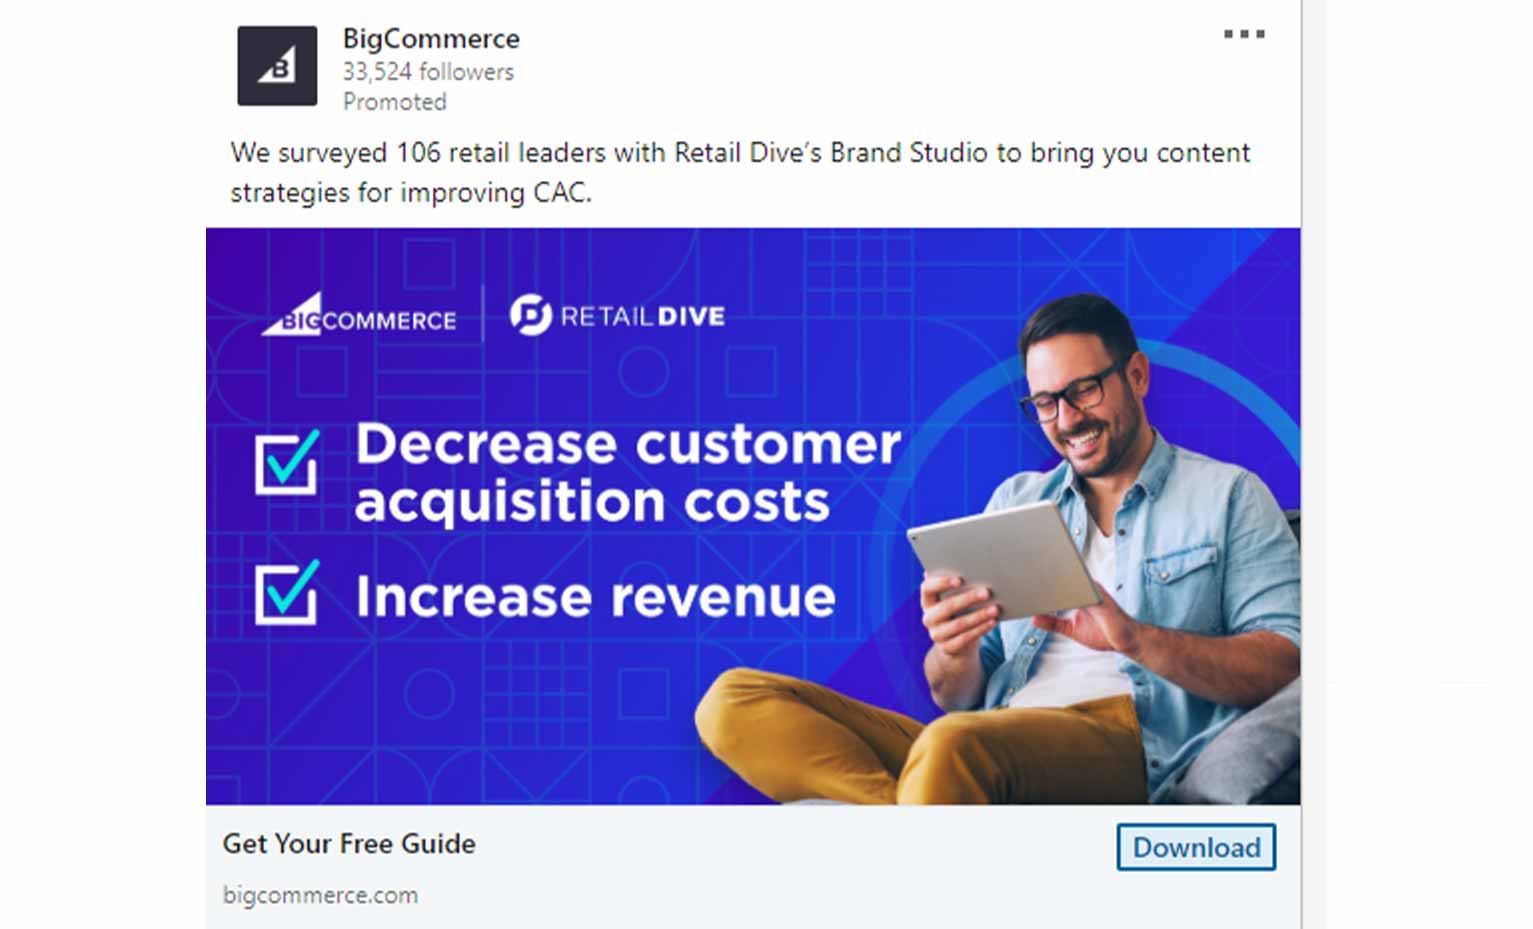 A promoted ad on LinkedIn run by the e-commerce site, BigCommerce.